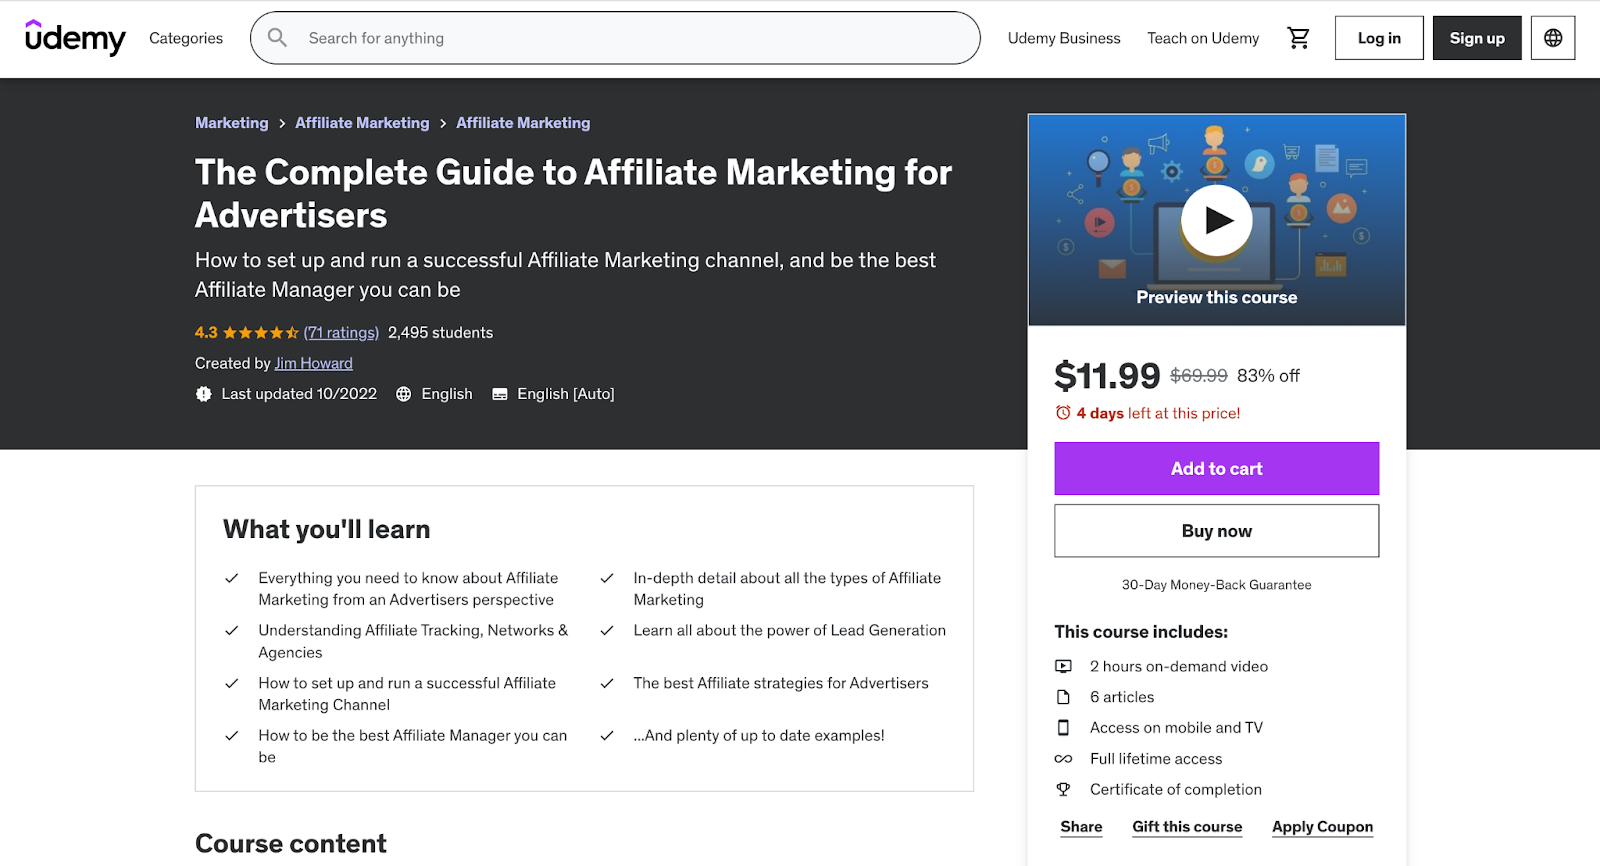 The Complete Guide to Affiliate Marketing for Advertisers course page on Udemy.